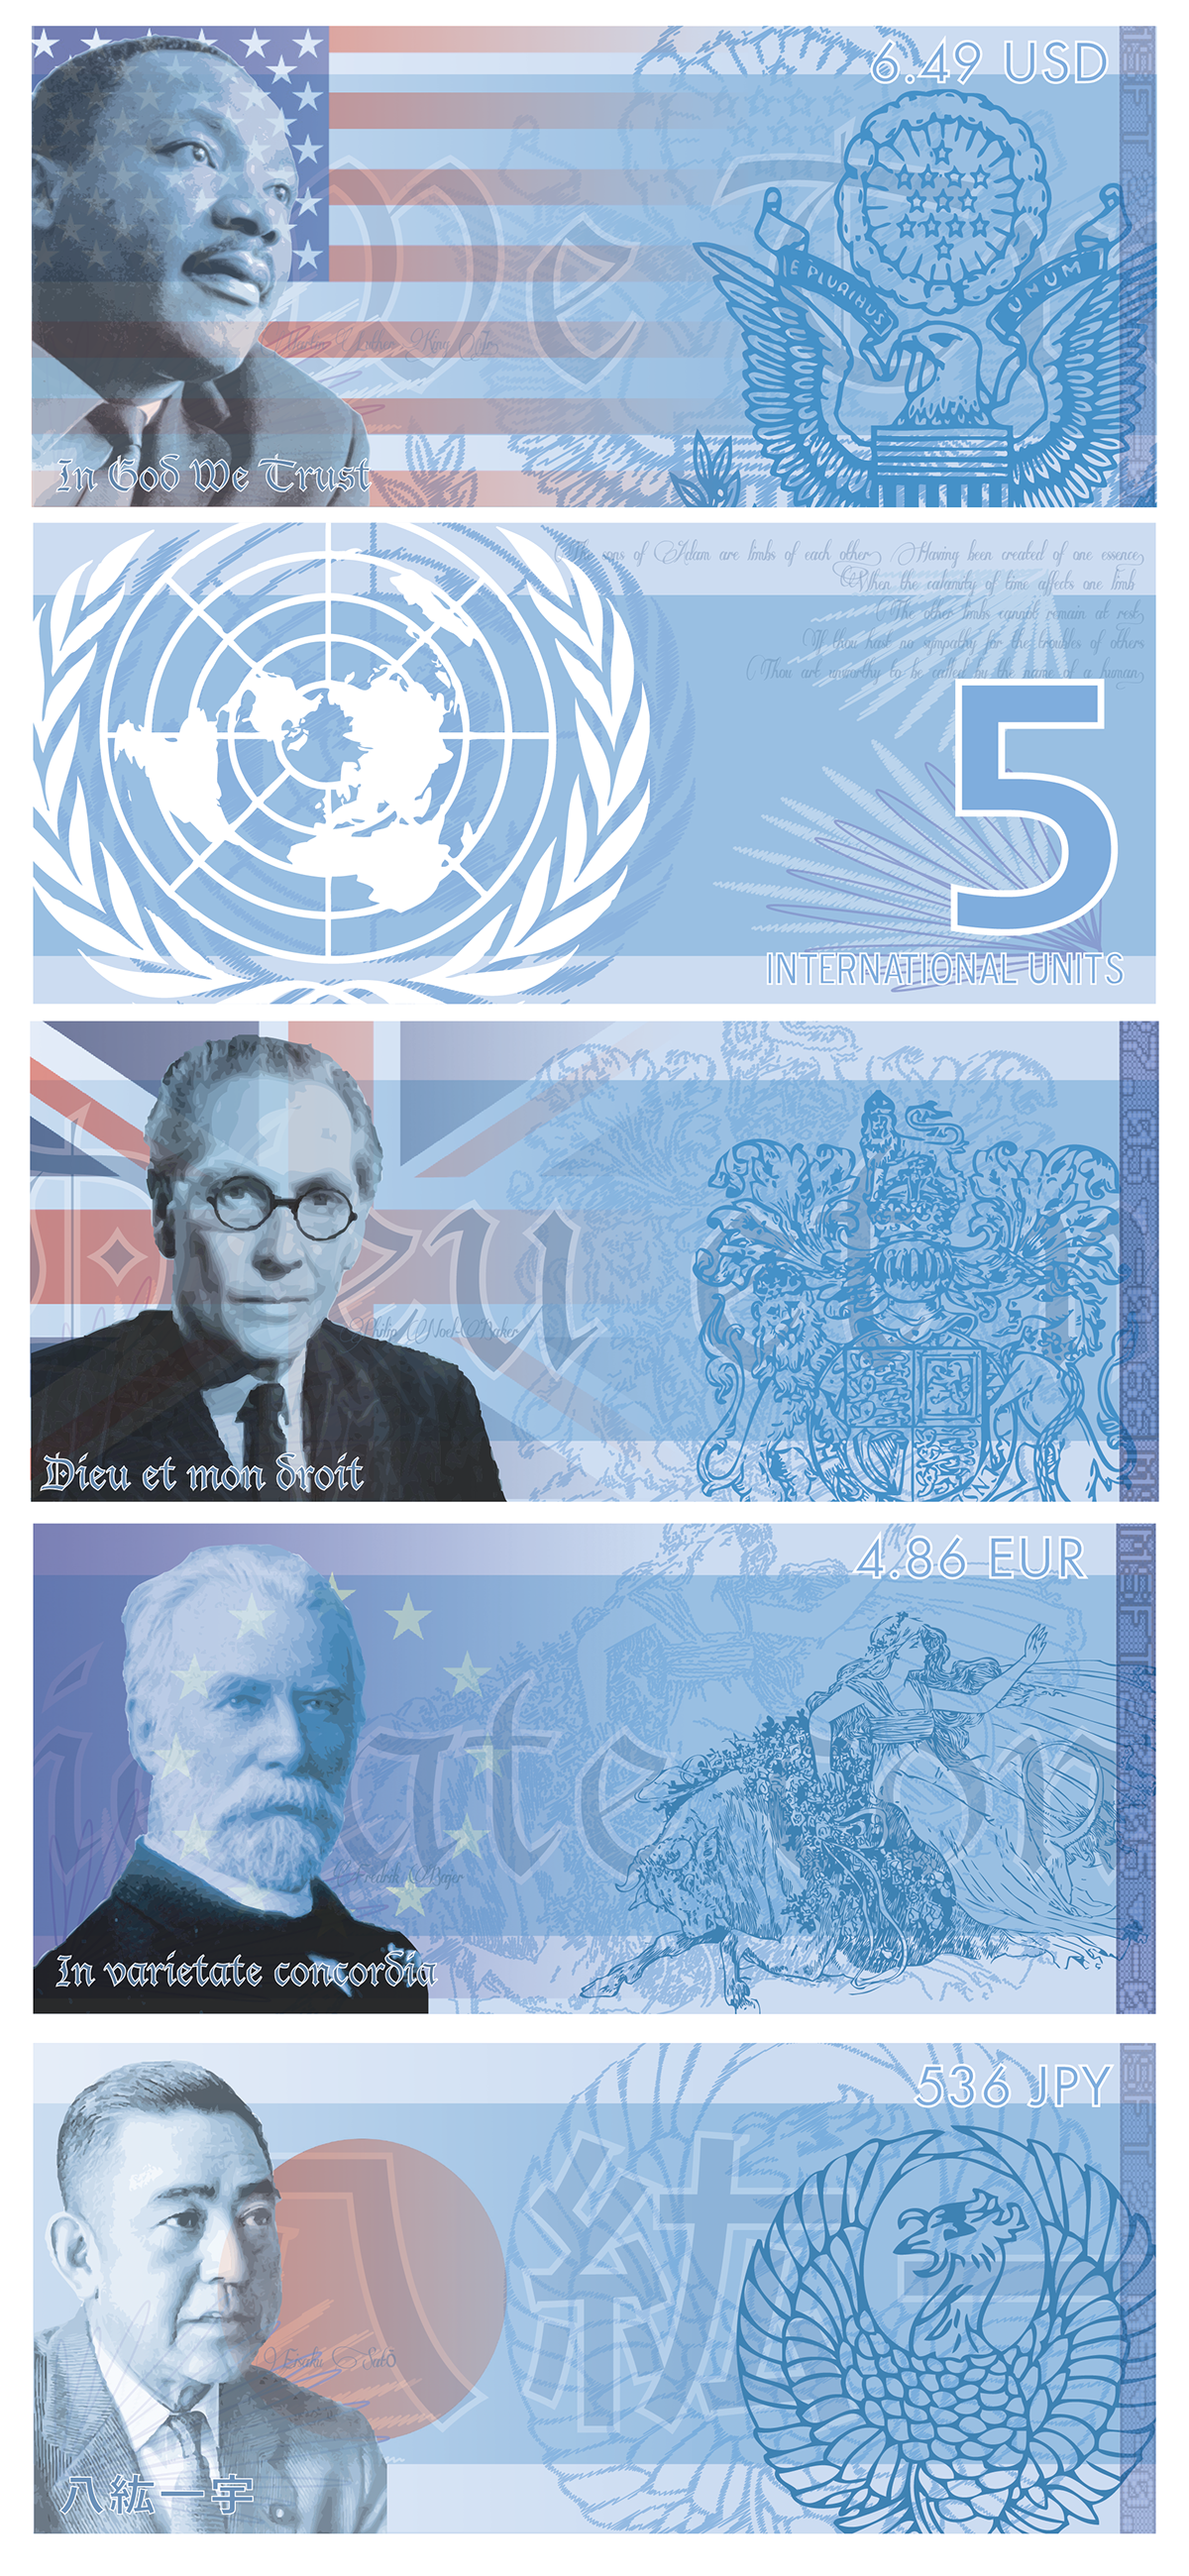 currency School assignment Student work